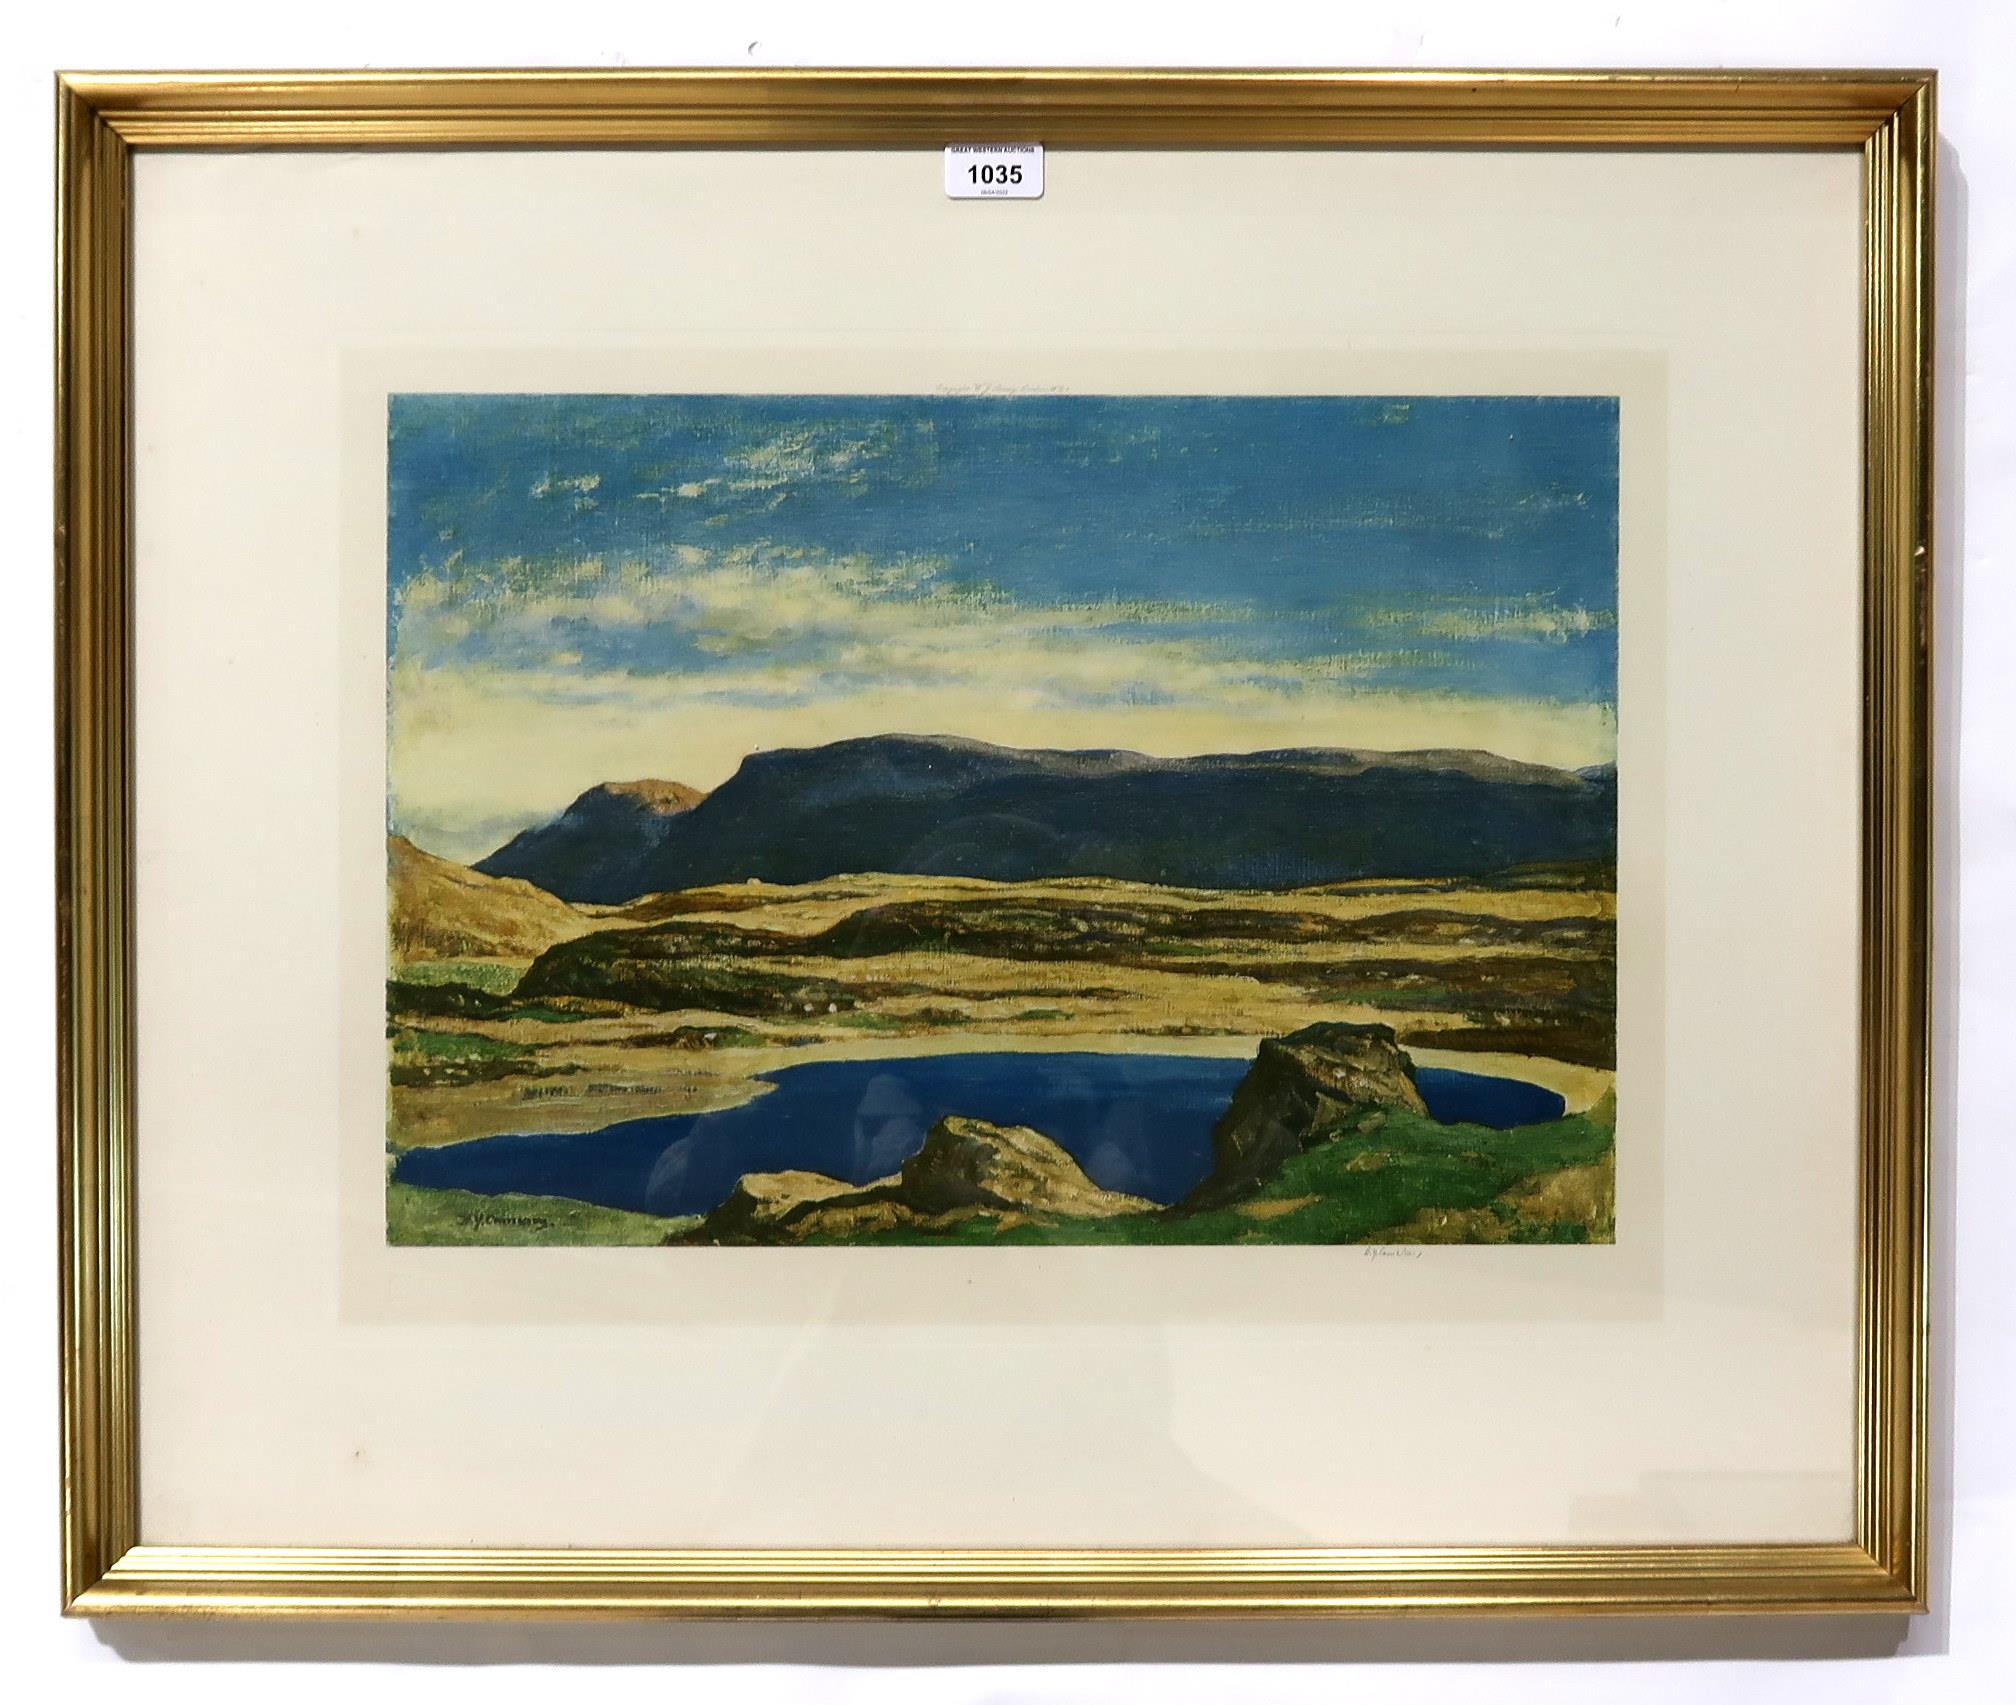 SIR DAVID YOUNG CAMERON Landscape, signed, print, 38 x 52cm Condition Report:Available upon request - Image 2 of 4